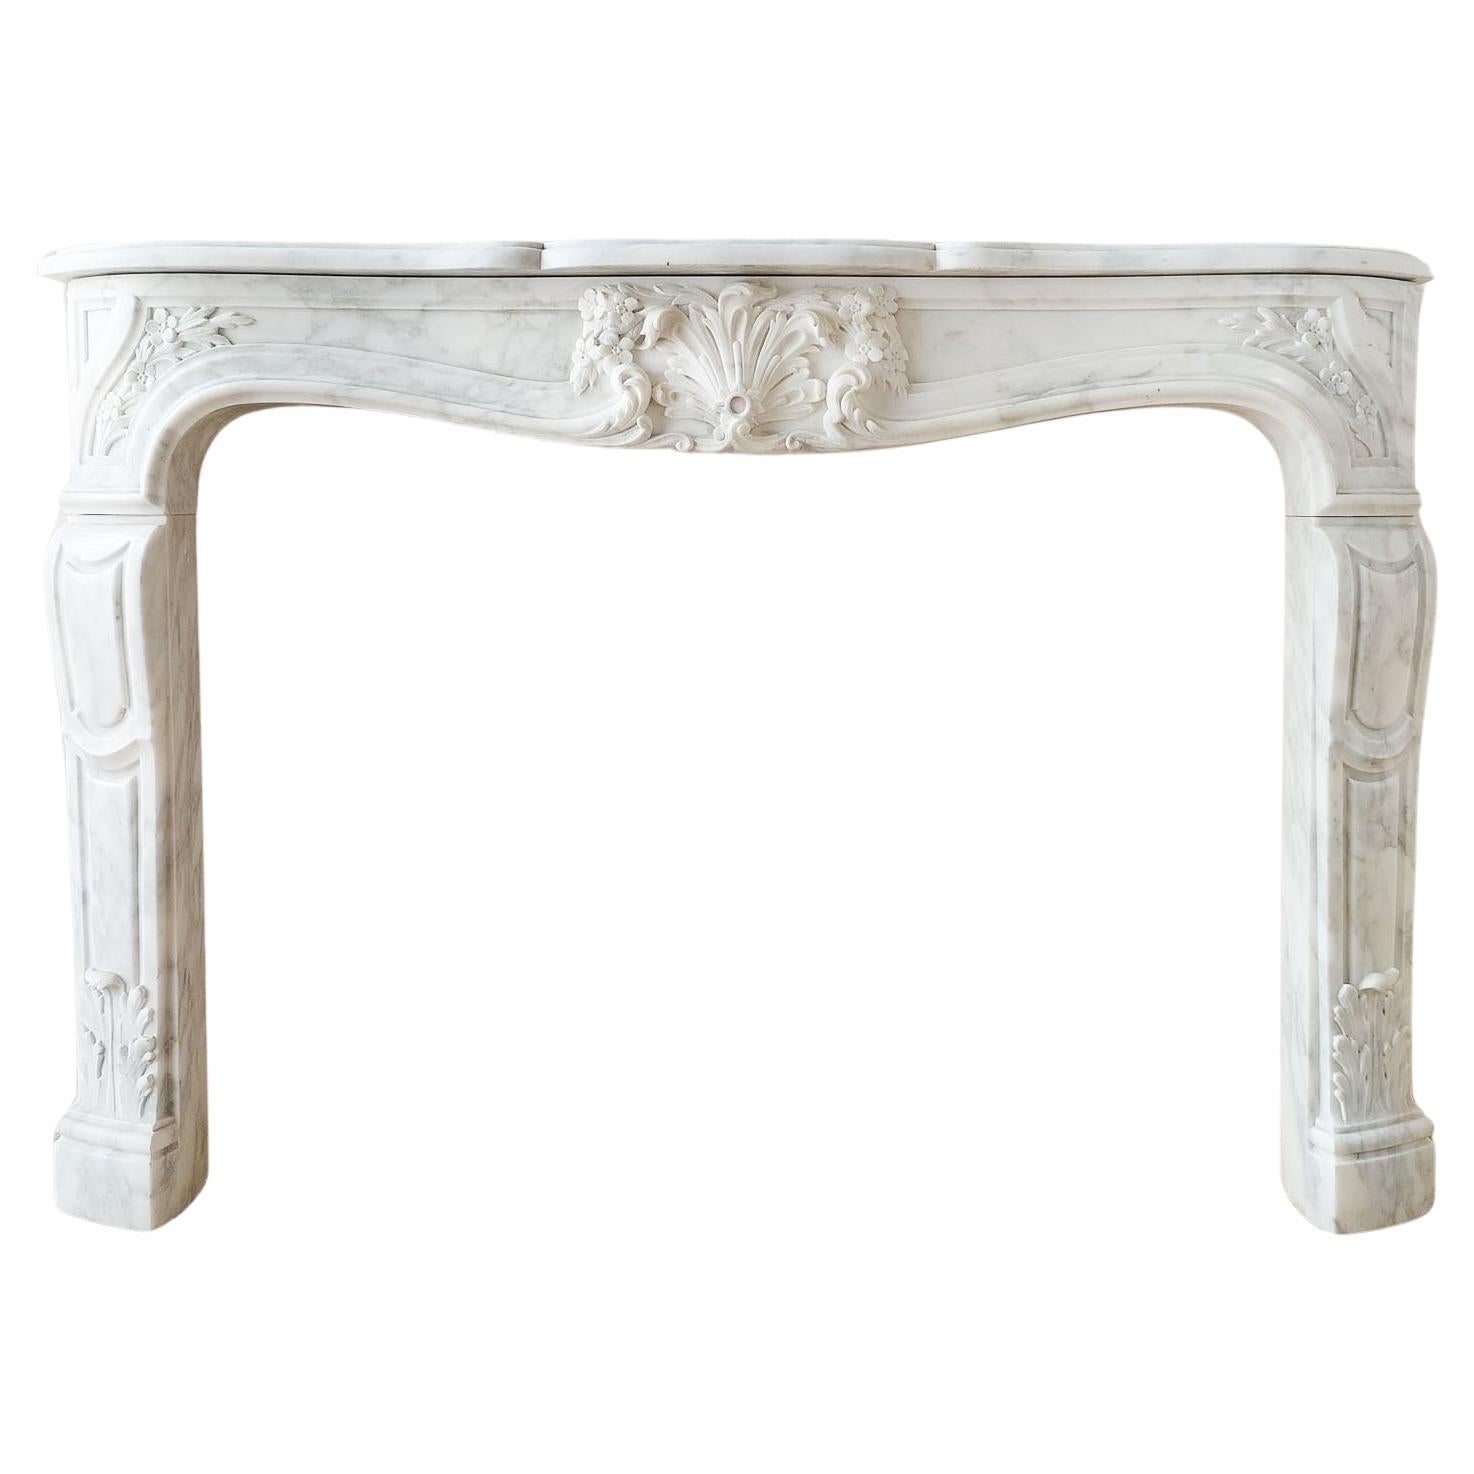 An Antique French Beautifully Carved Carrara Marble Fireplace with Coquille For Sale